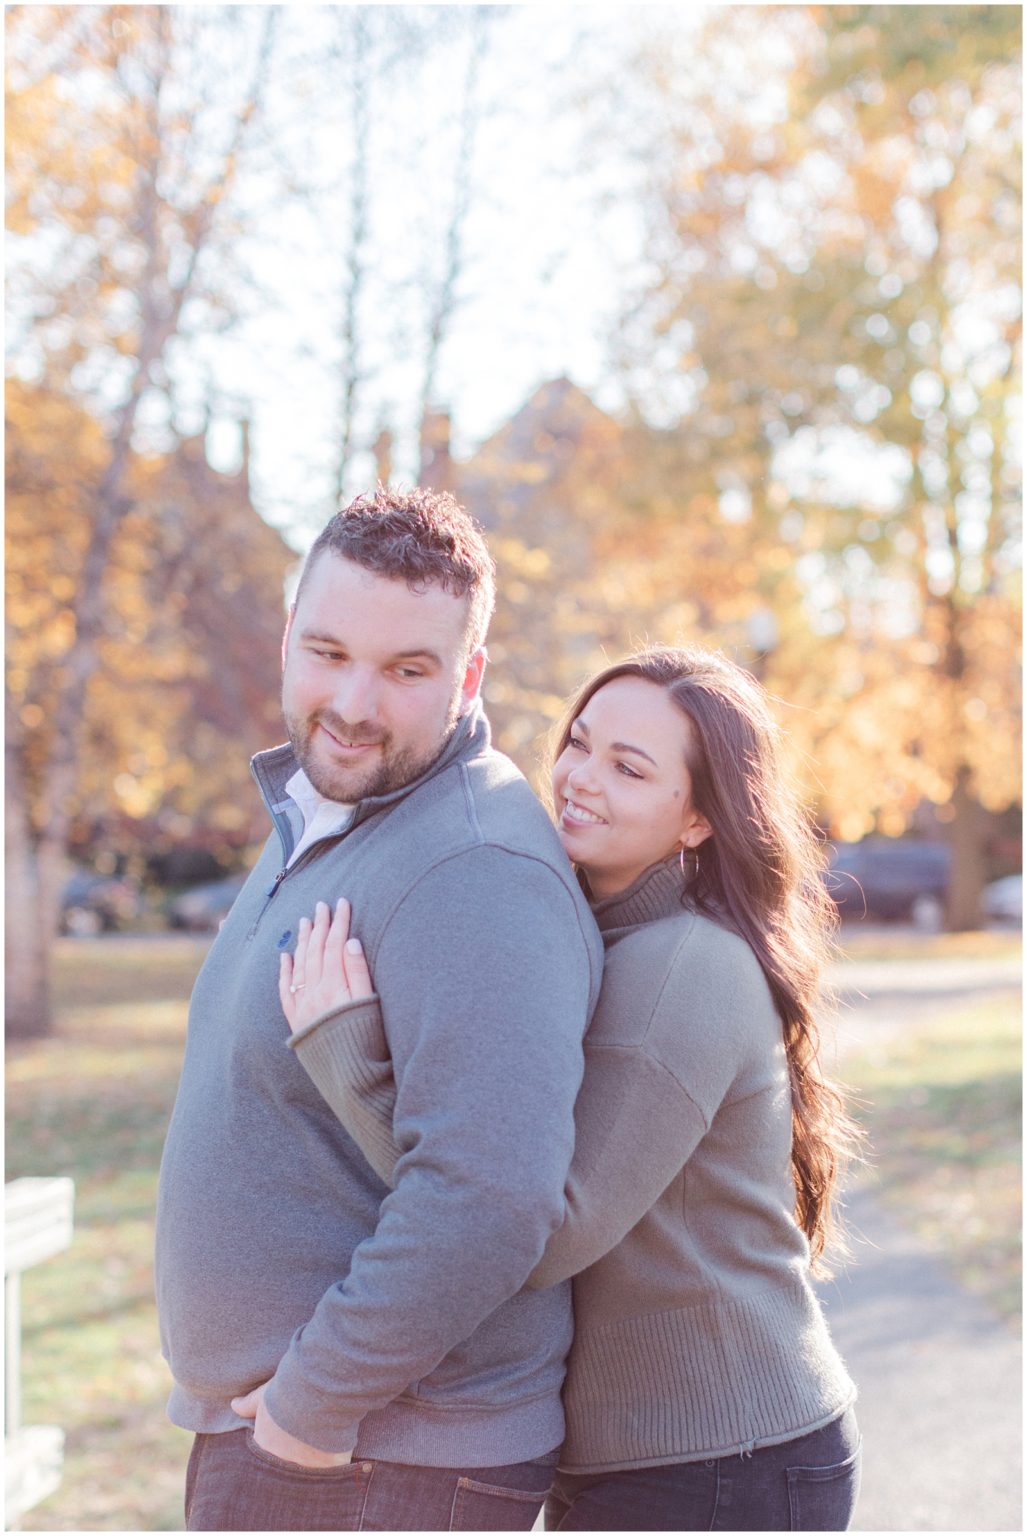 Engagement Session at Schiller Park | Aaryn + Andy - lraphoto.com